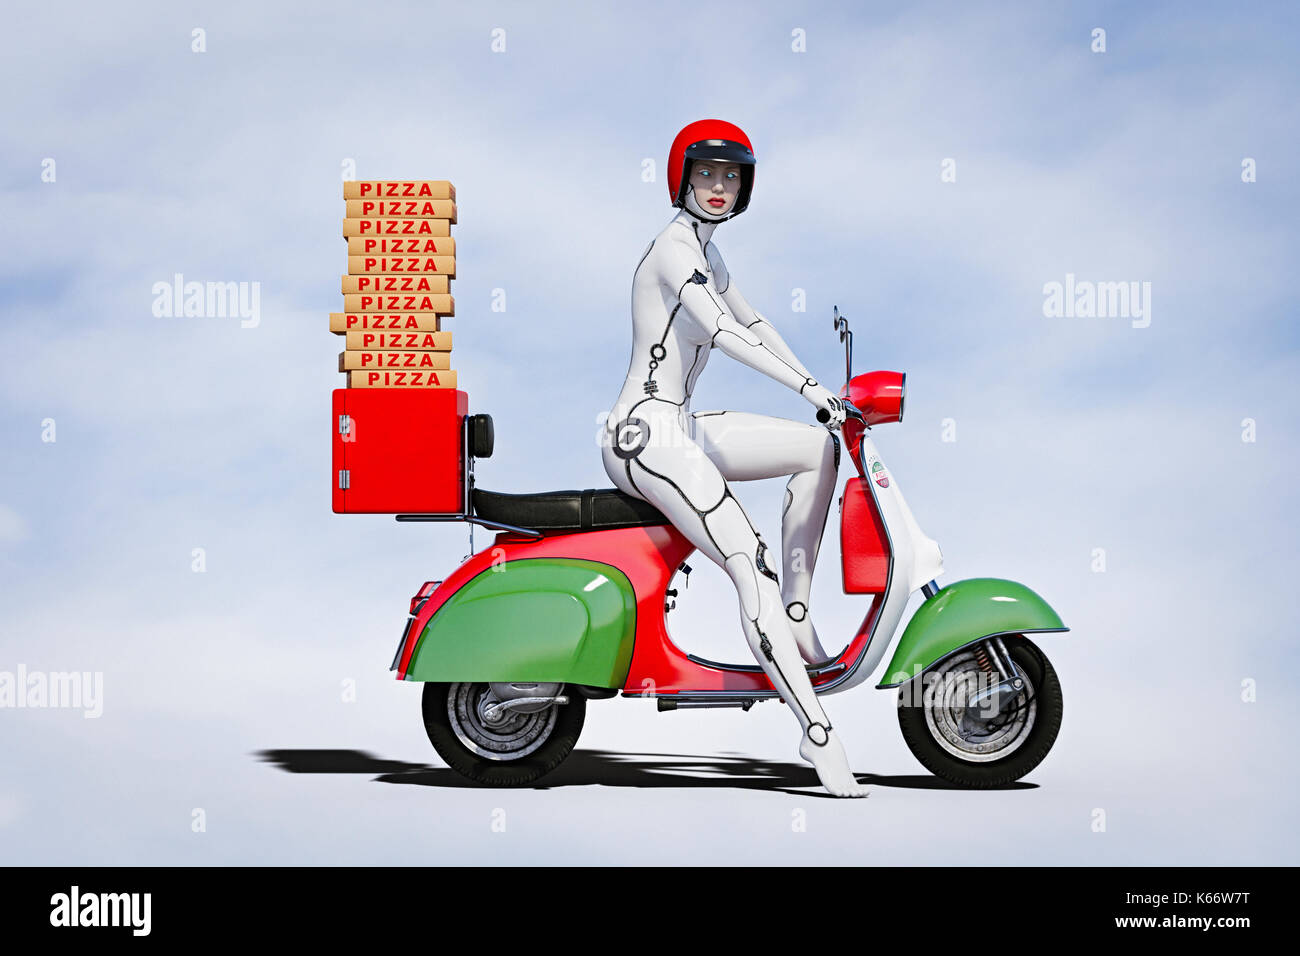 Cyborg woman delivering pizza on motor scooter Stock Photo